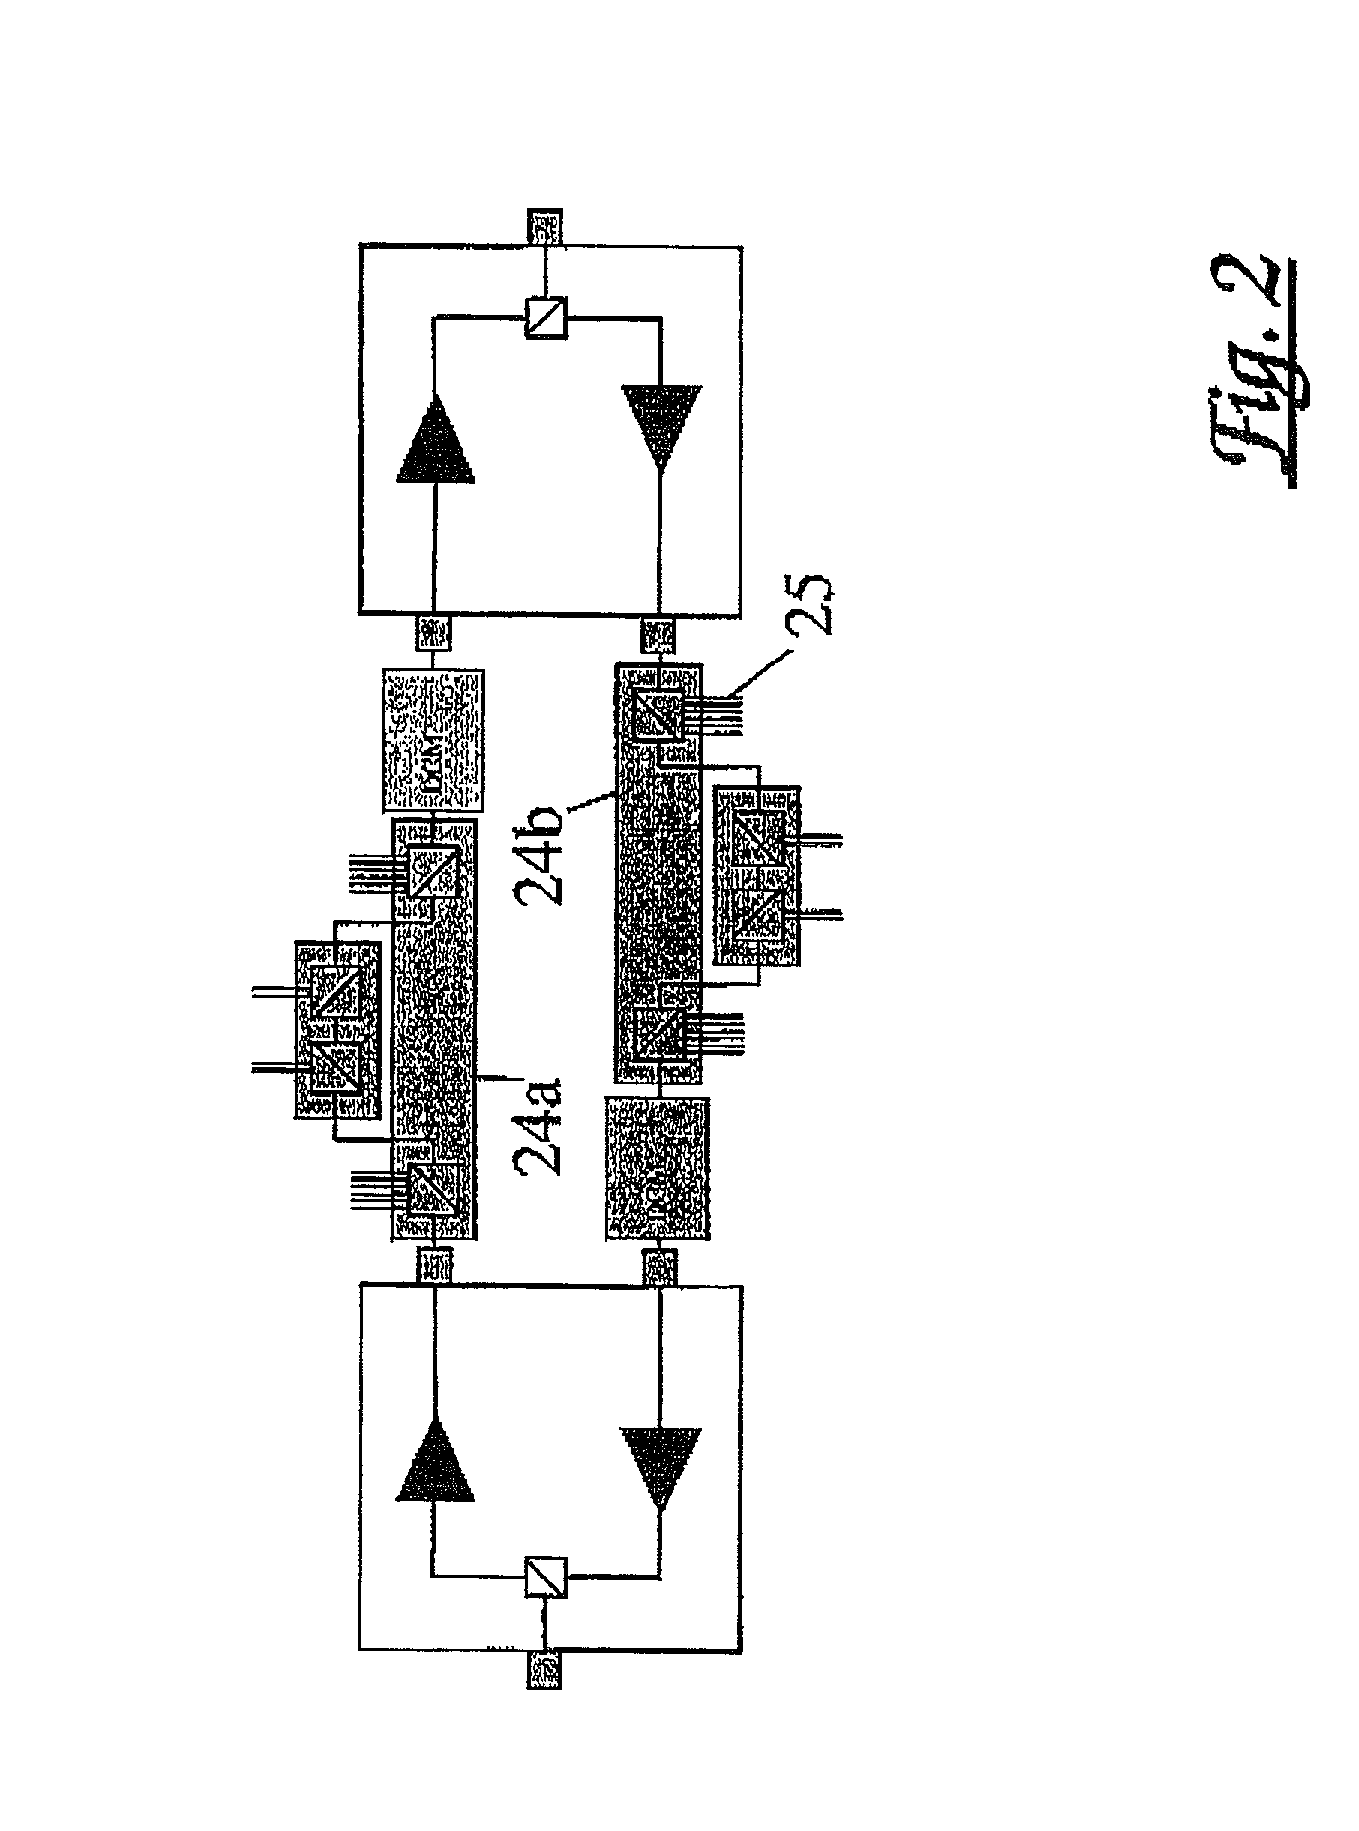 Signal to noise ratio measurement in a communications system